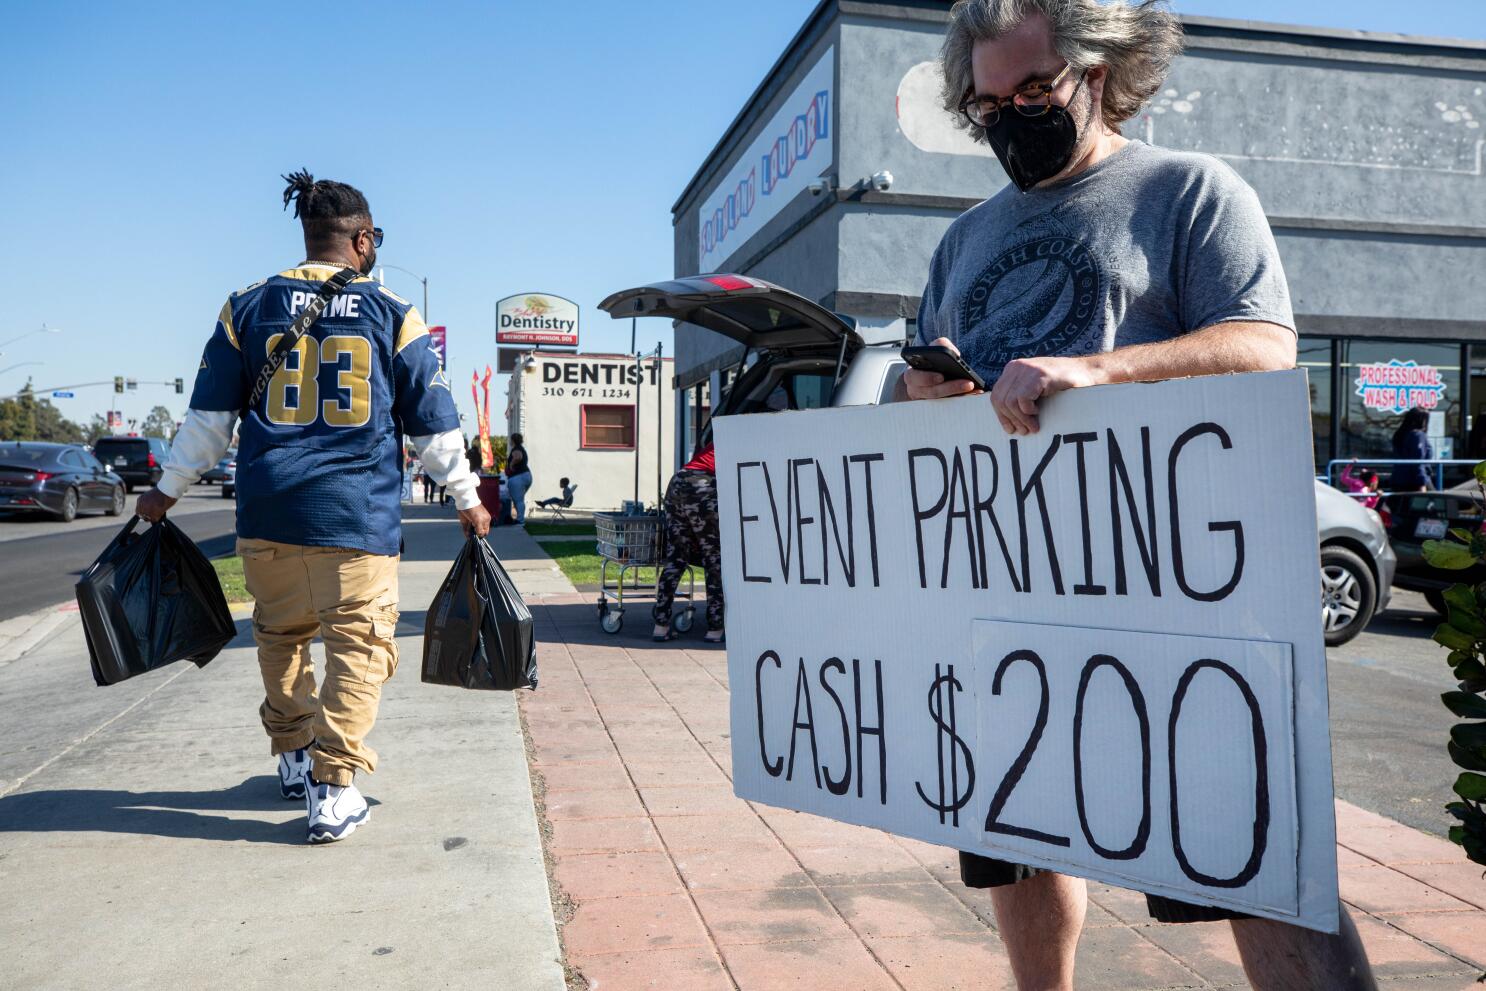 For Super Bowl 2022, resellers push parking prices high - Los